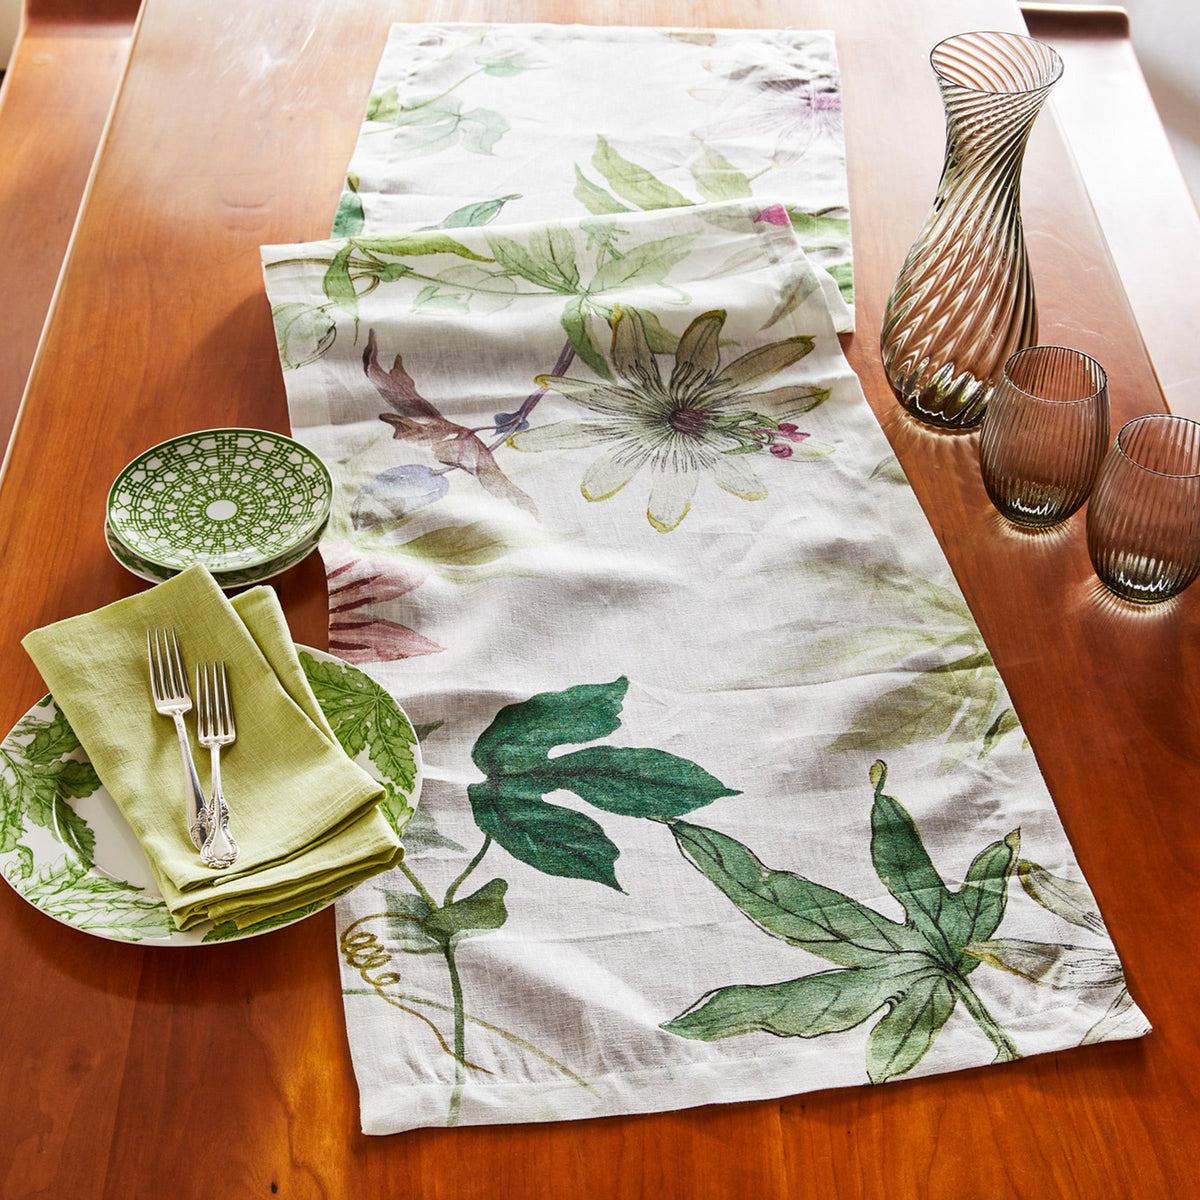 A Pistachio Linen Dinner Napkins Set/4 with woven green and white flowers on it. (Brand: TTT)